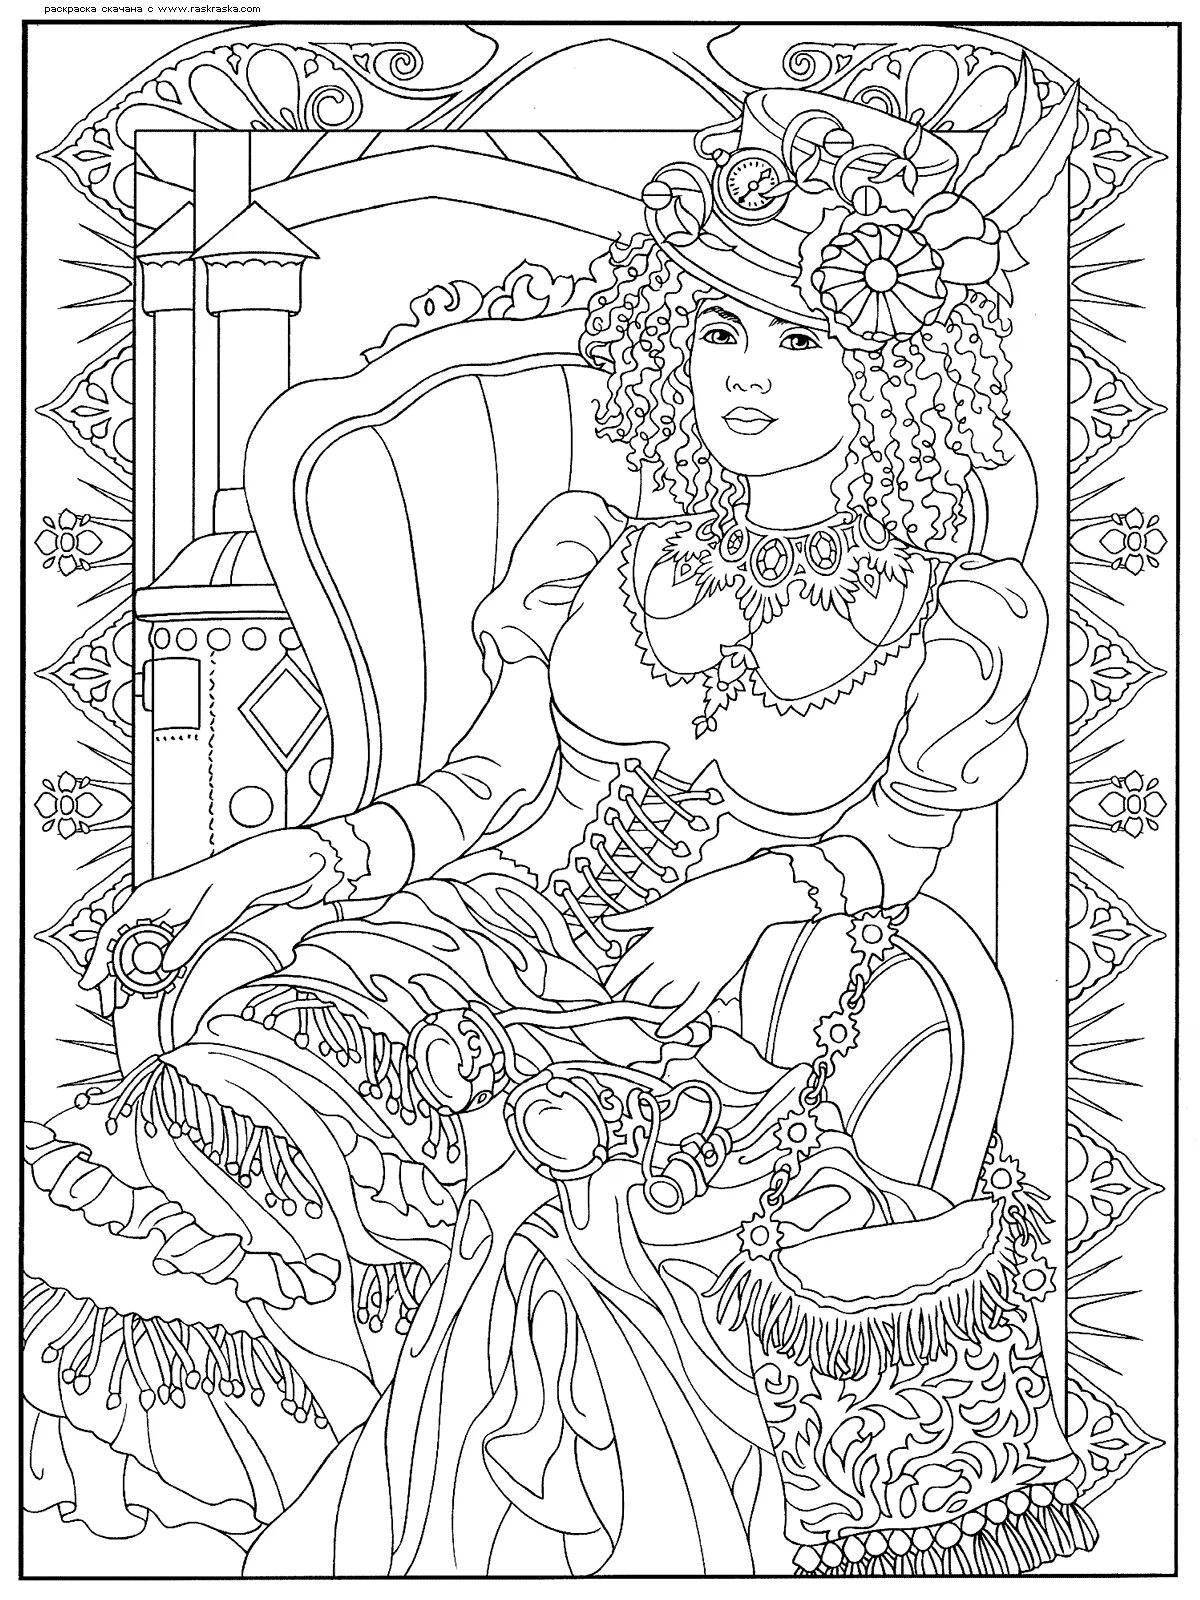 Glowing coloring pages for adults